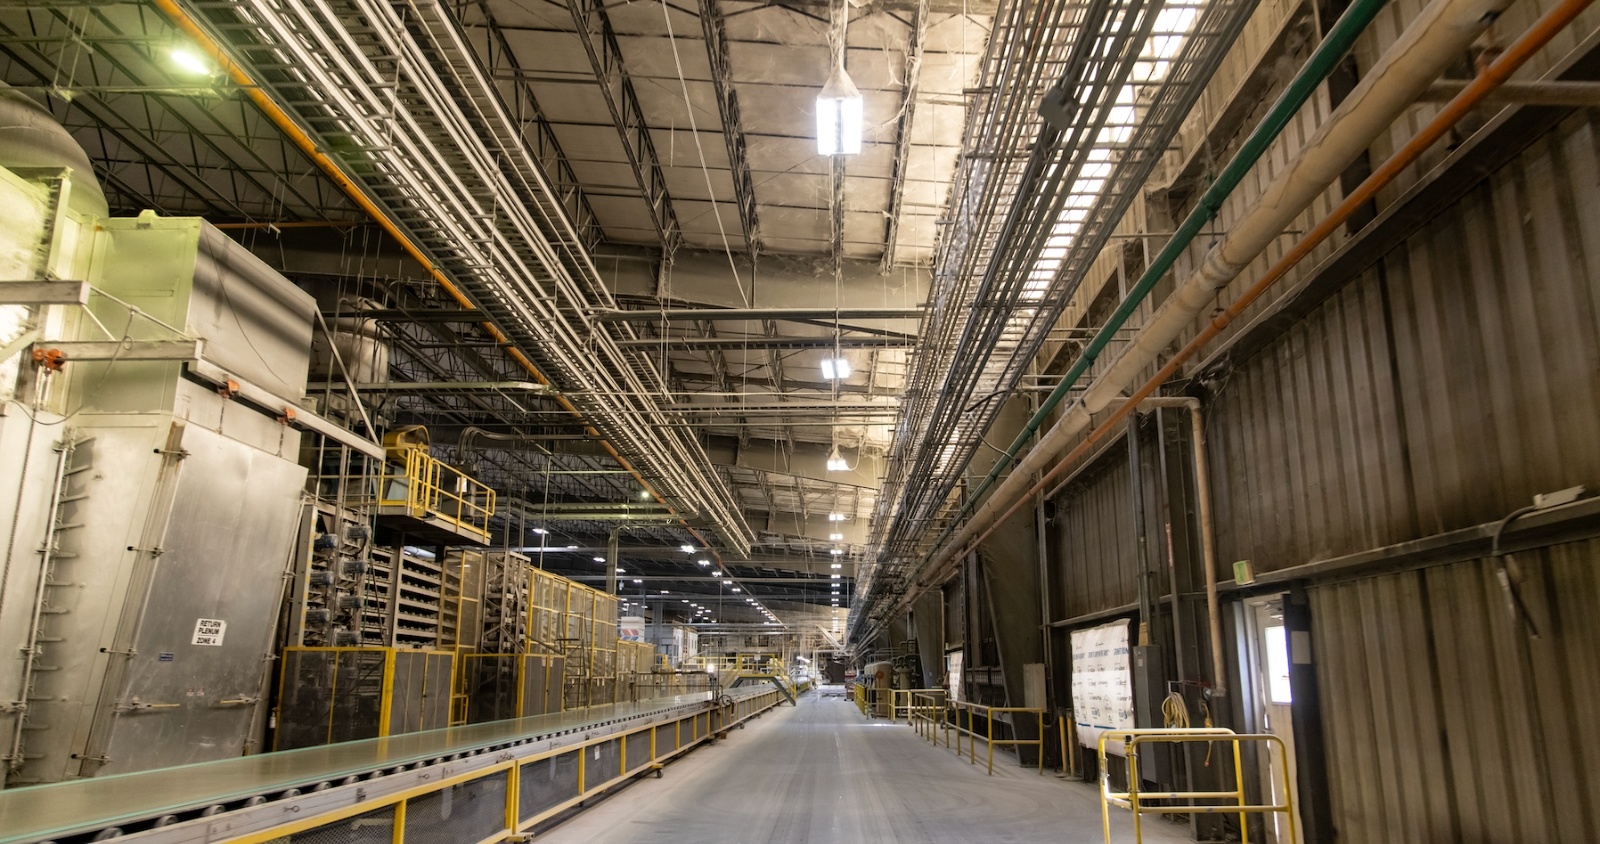 Inside of industrial facility